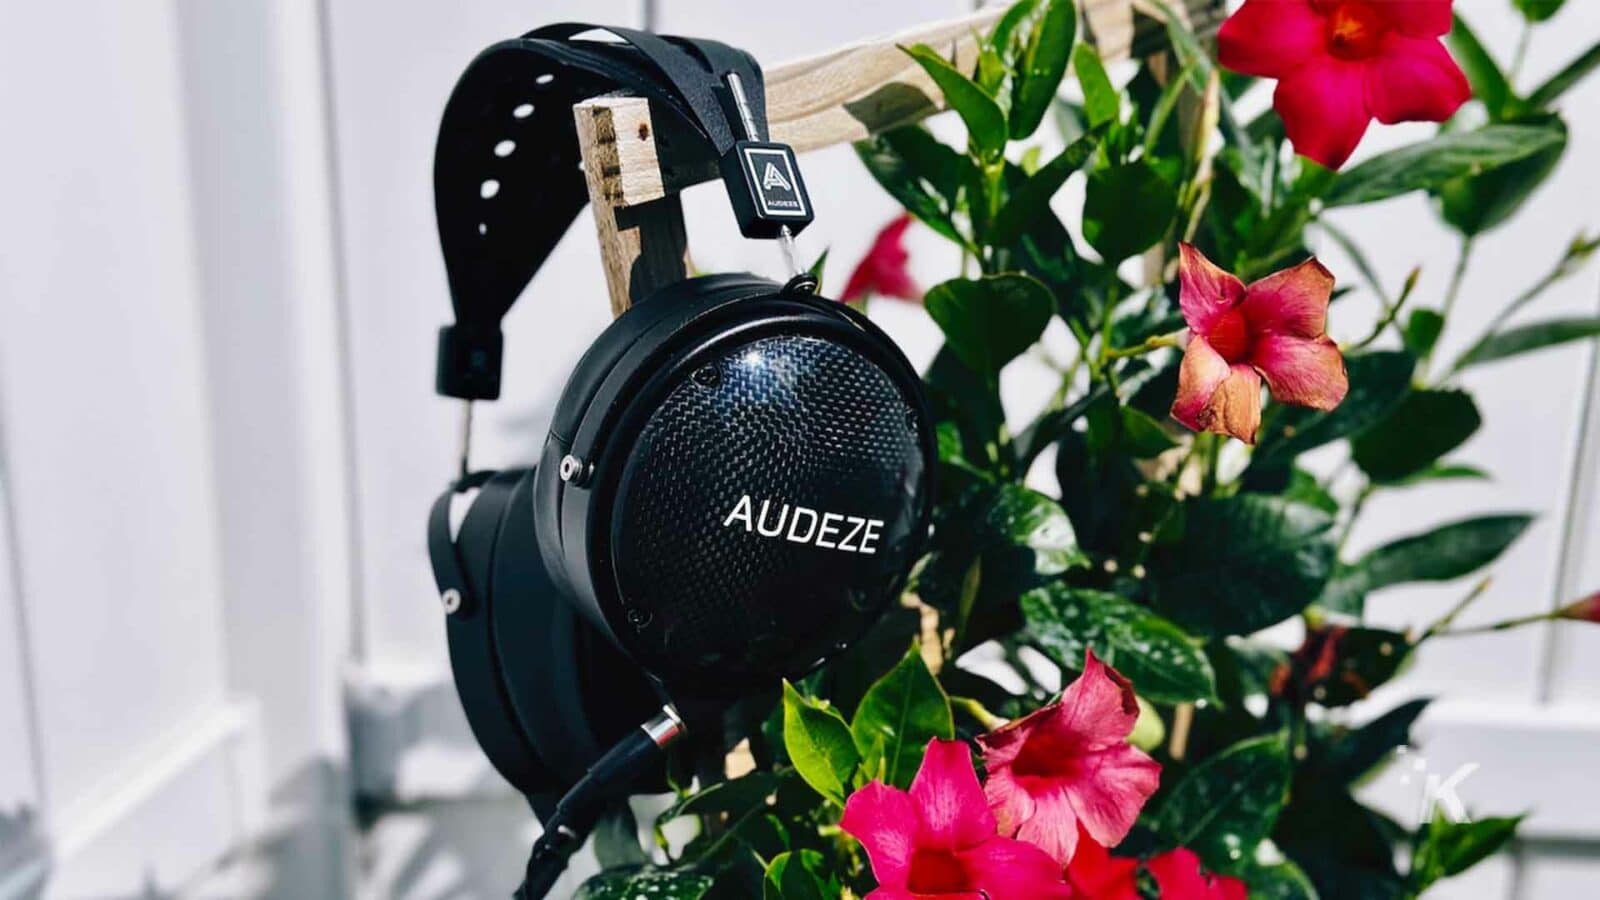 A pair of headphones rests atop a vibrant flower and lush plant in an indoor setting.